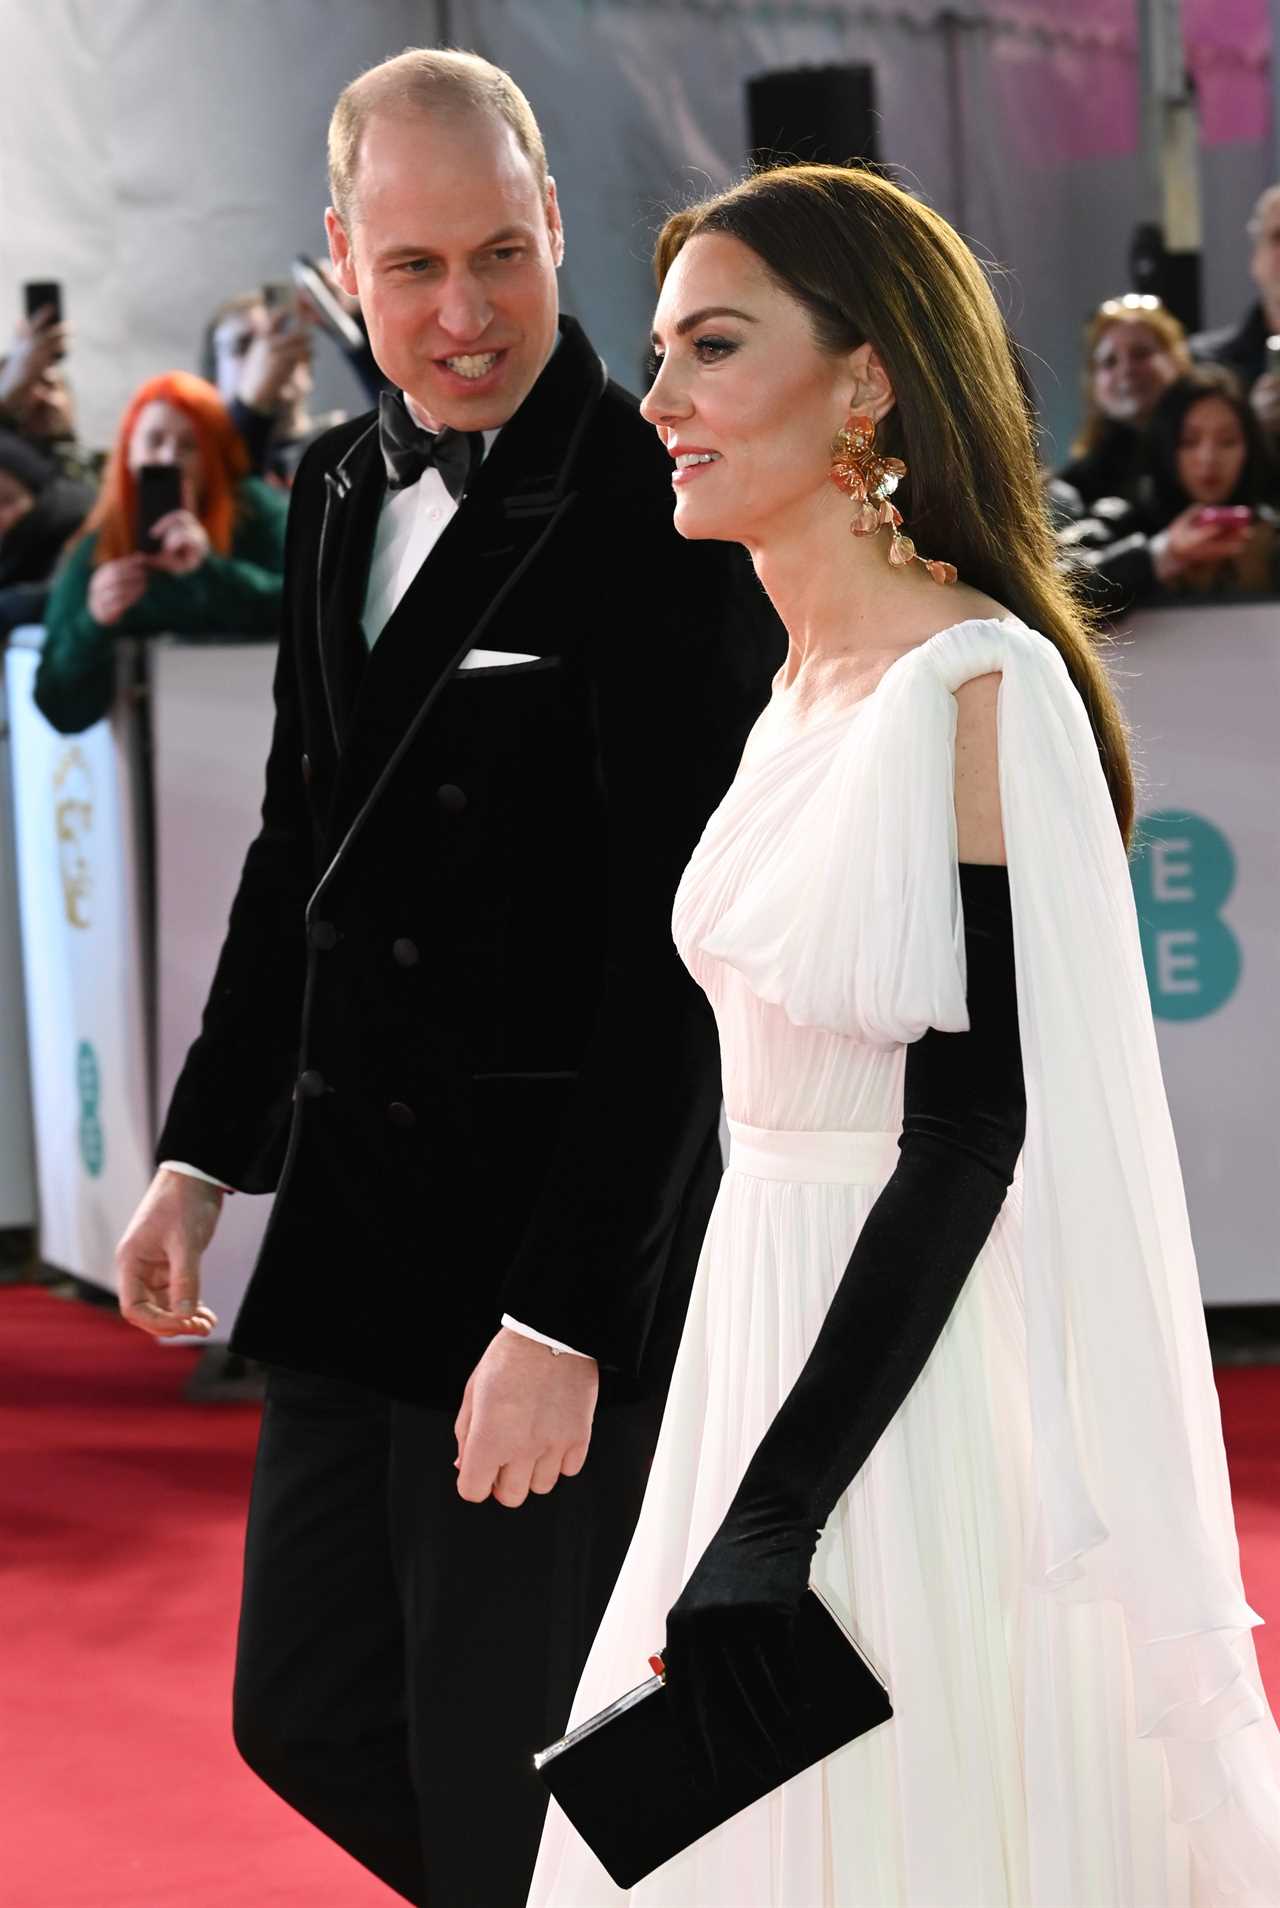 Princess Kate has royal fans in stitches over cheeky moment with Prince William on Baftas red carpet – did you spot it?